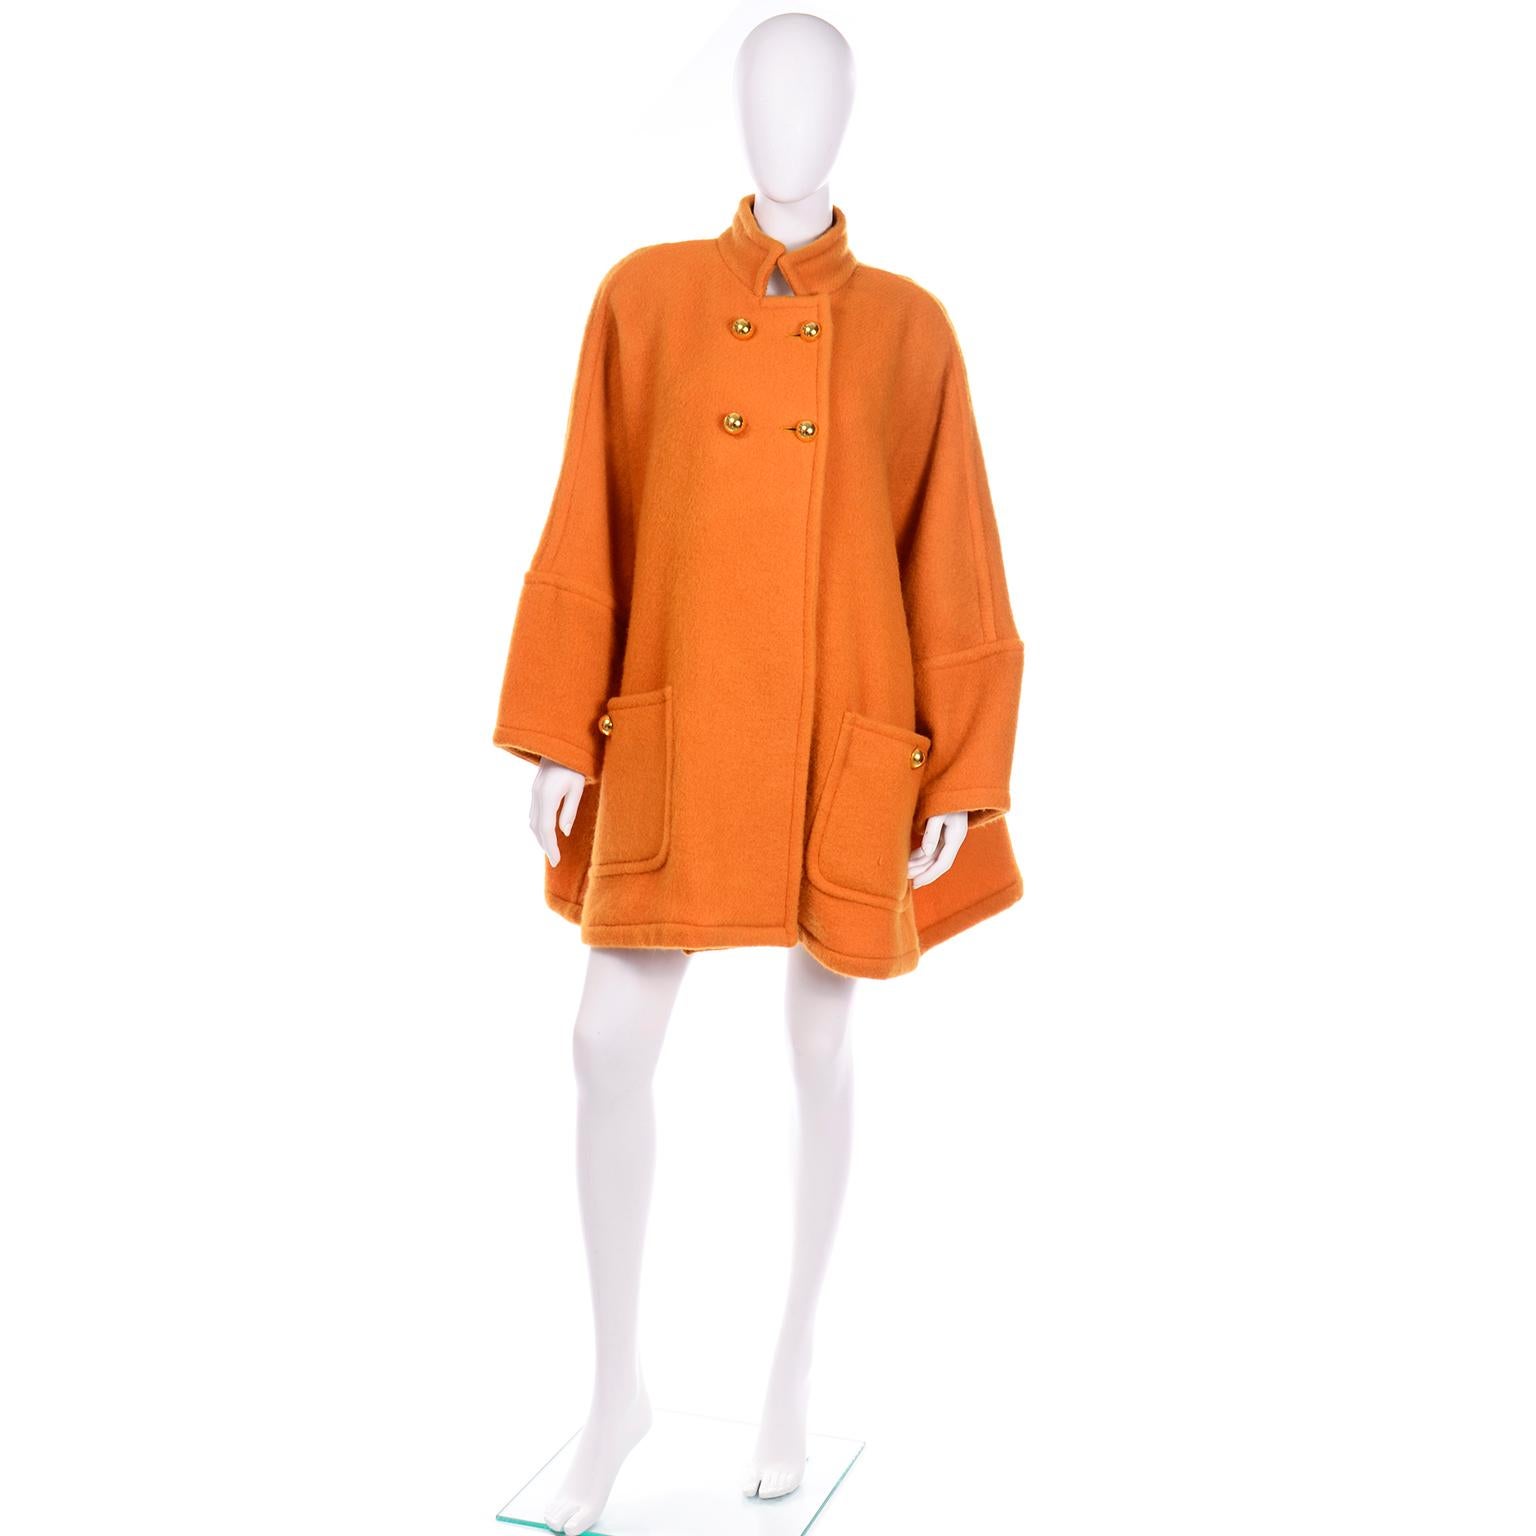 This vintage Guy Laroche coat is in a tangerine shade of orange mohair and wool blend with round dome gold buttons. There are two functional front pockets with gold button closures and shoulder pads for structure. The batwing sleeves add so much